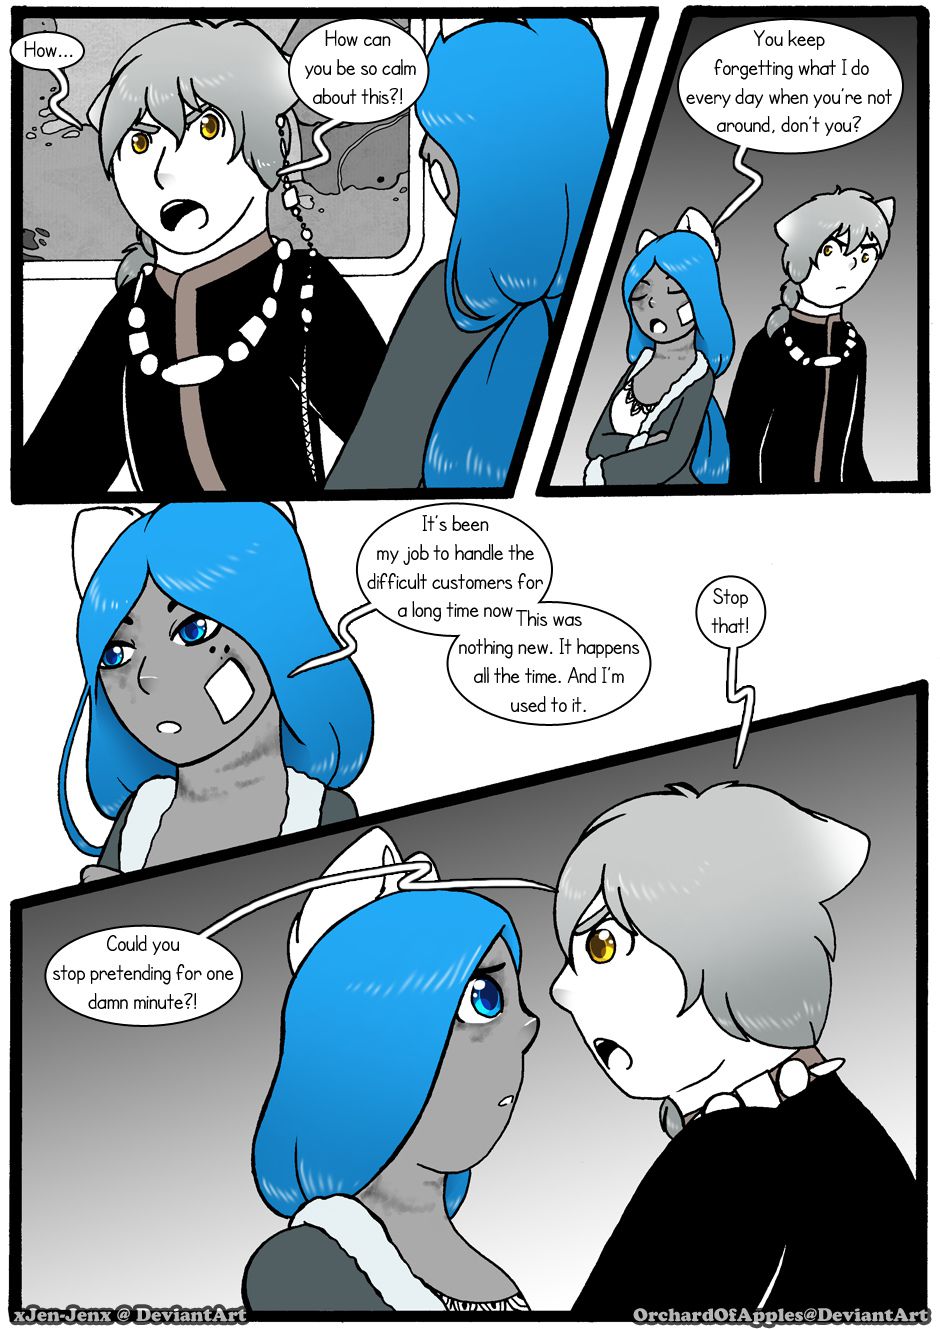 [Jeny-jen94] Between Kings and Queens [Ongoing] 177